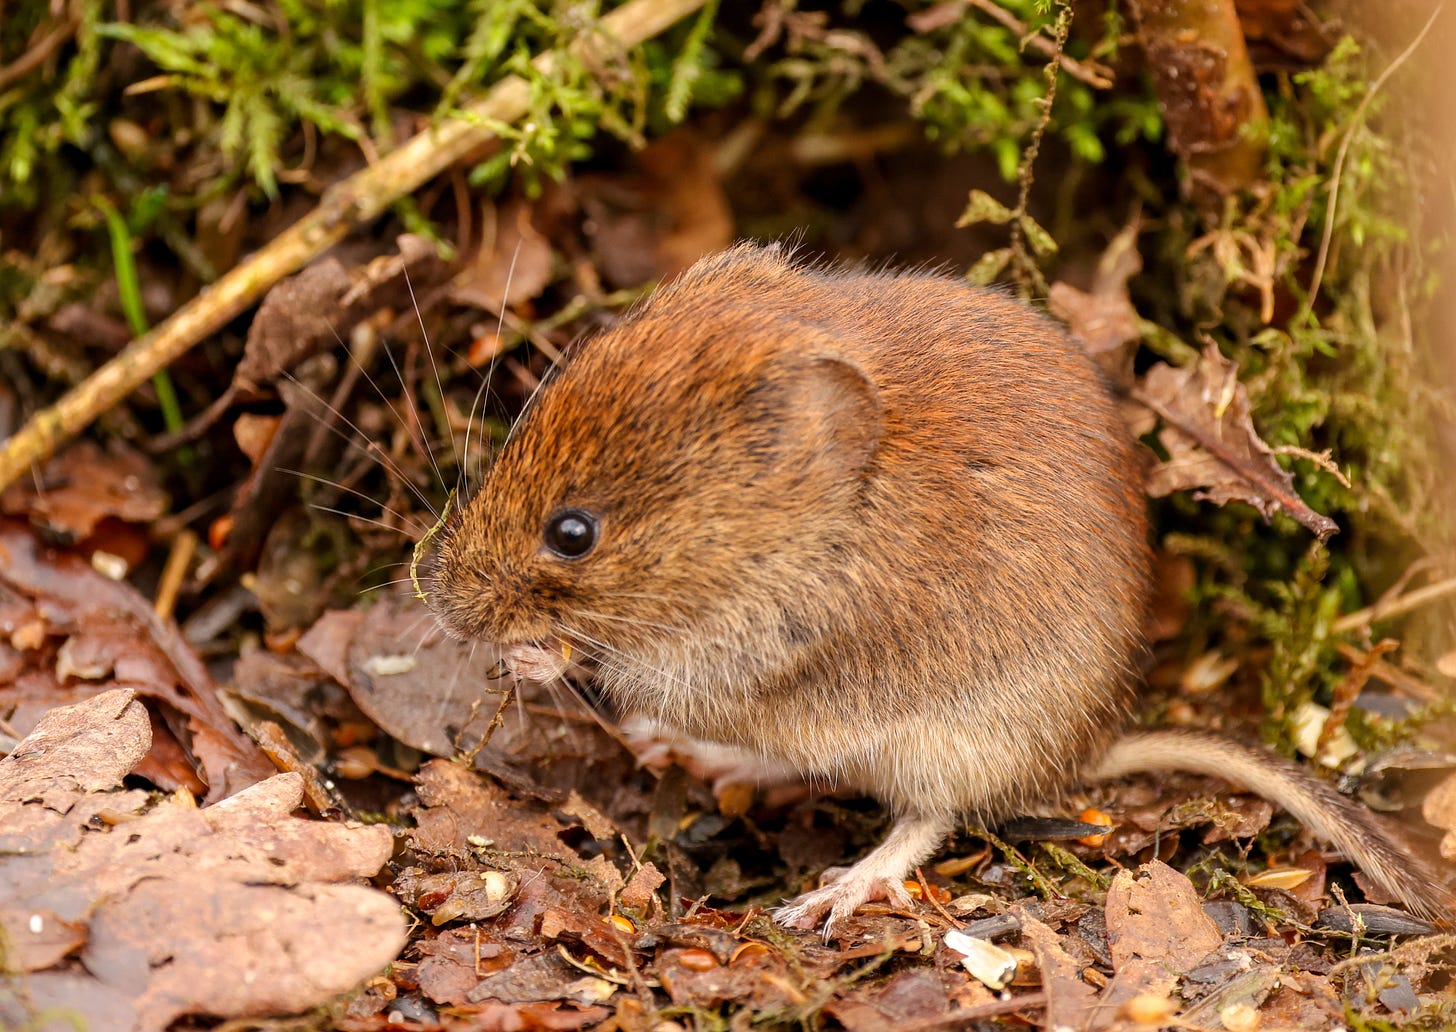 Image of a brown and cream colored rodant, a vole in a field of wet leaves